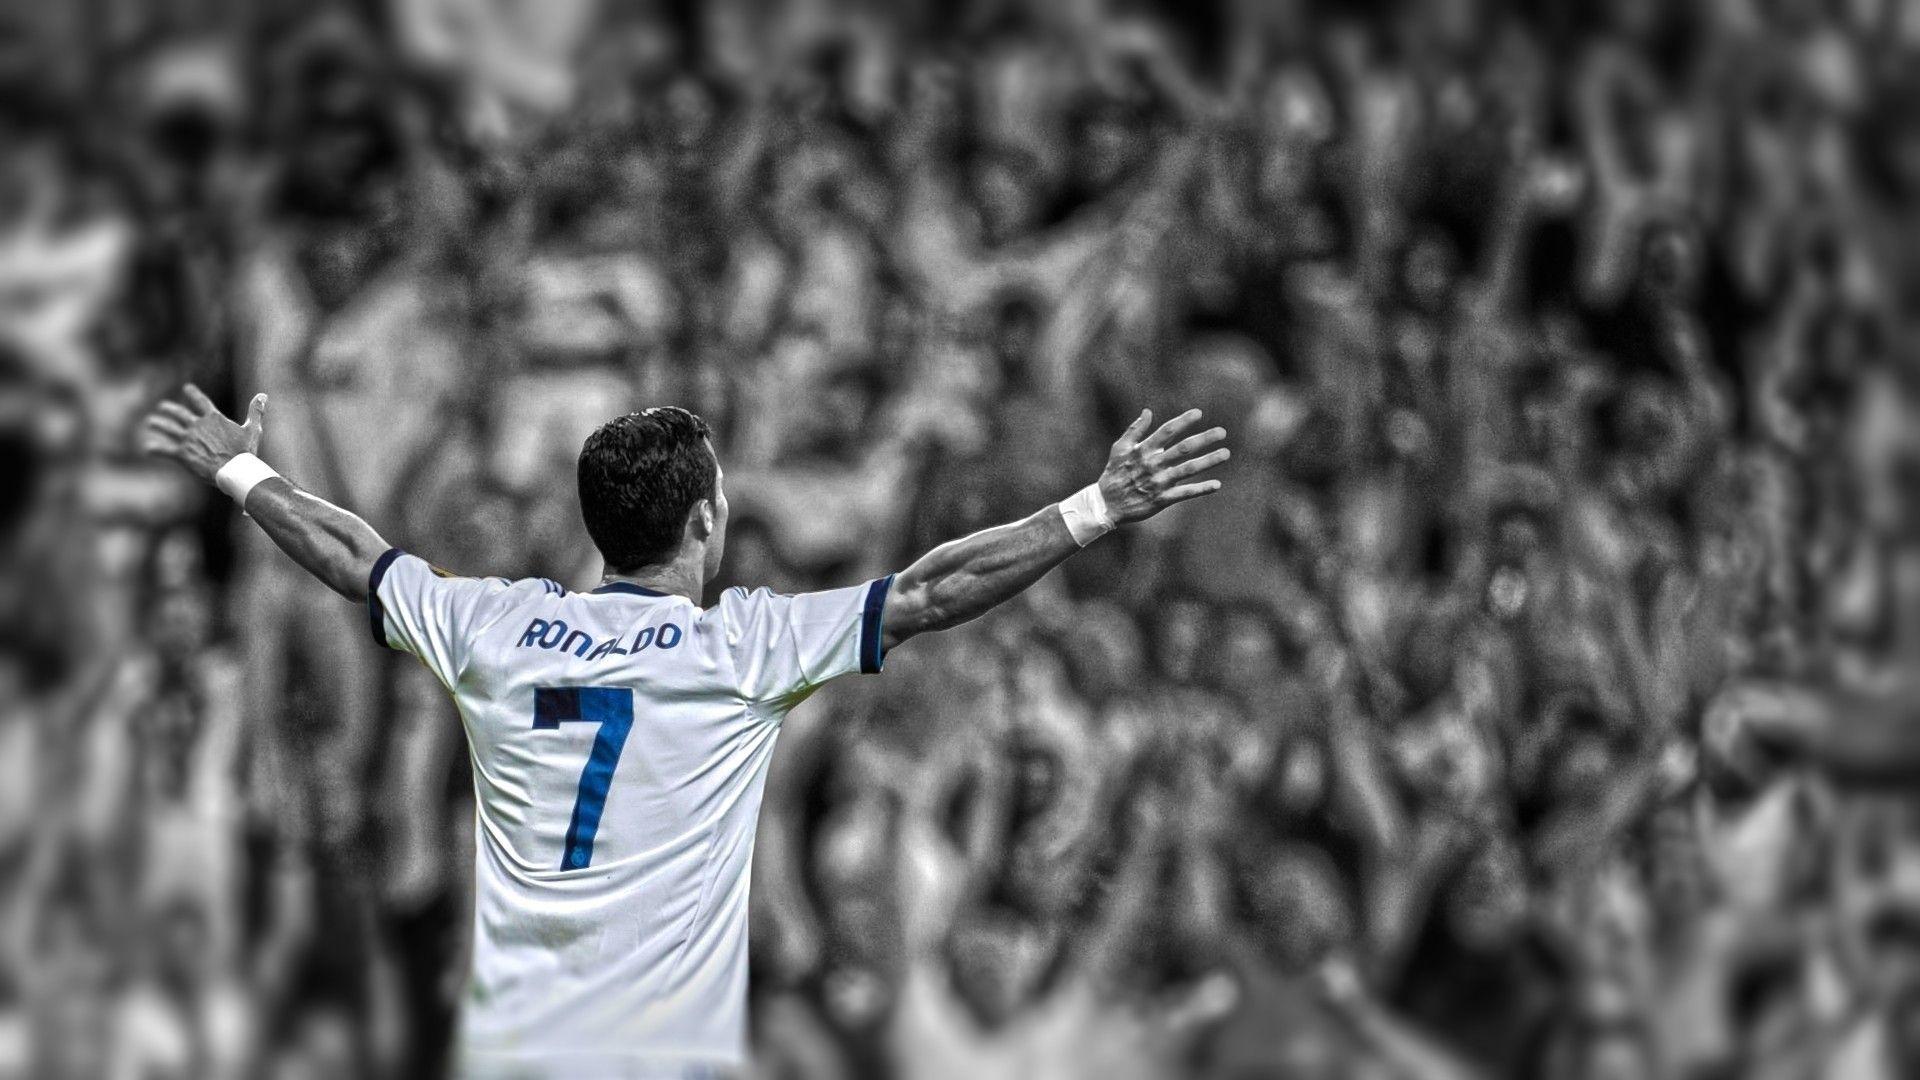 The player of Real Madrid Cristiano Ronaldo plays as number 7